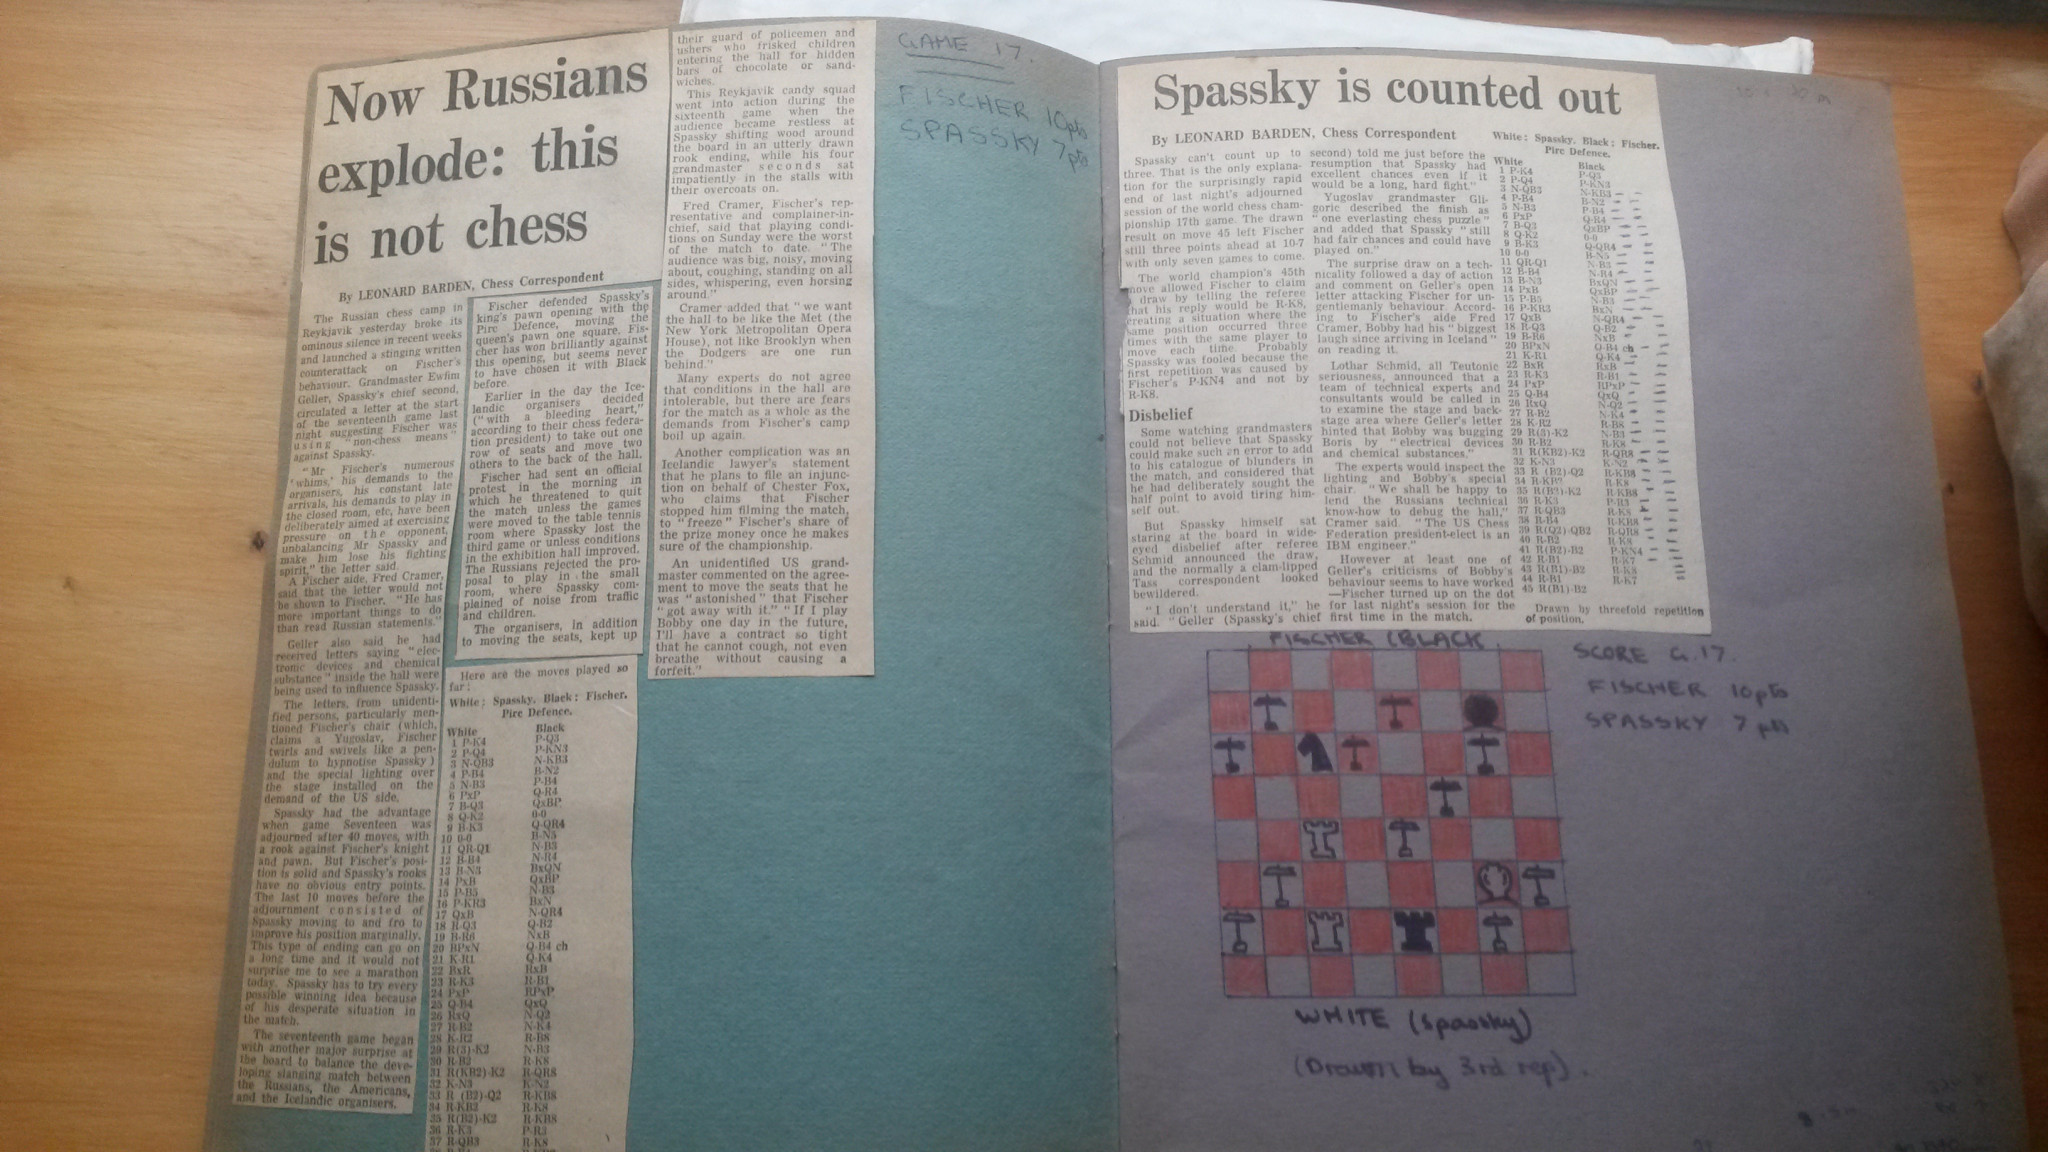 The mood shifted again as Boris Spassky's camp complained about Bobby Fischer employing 